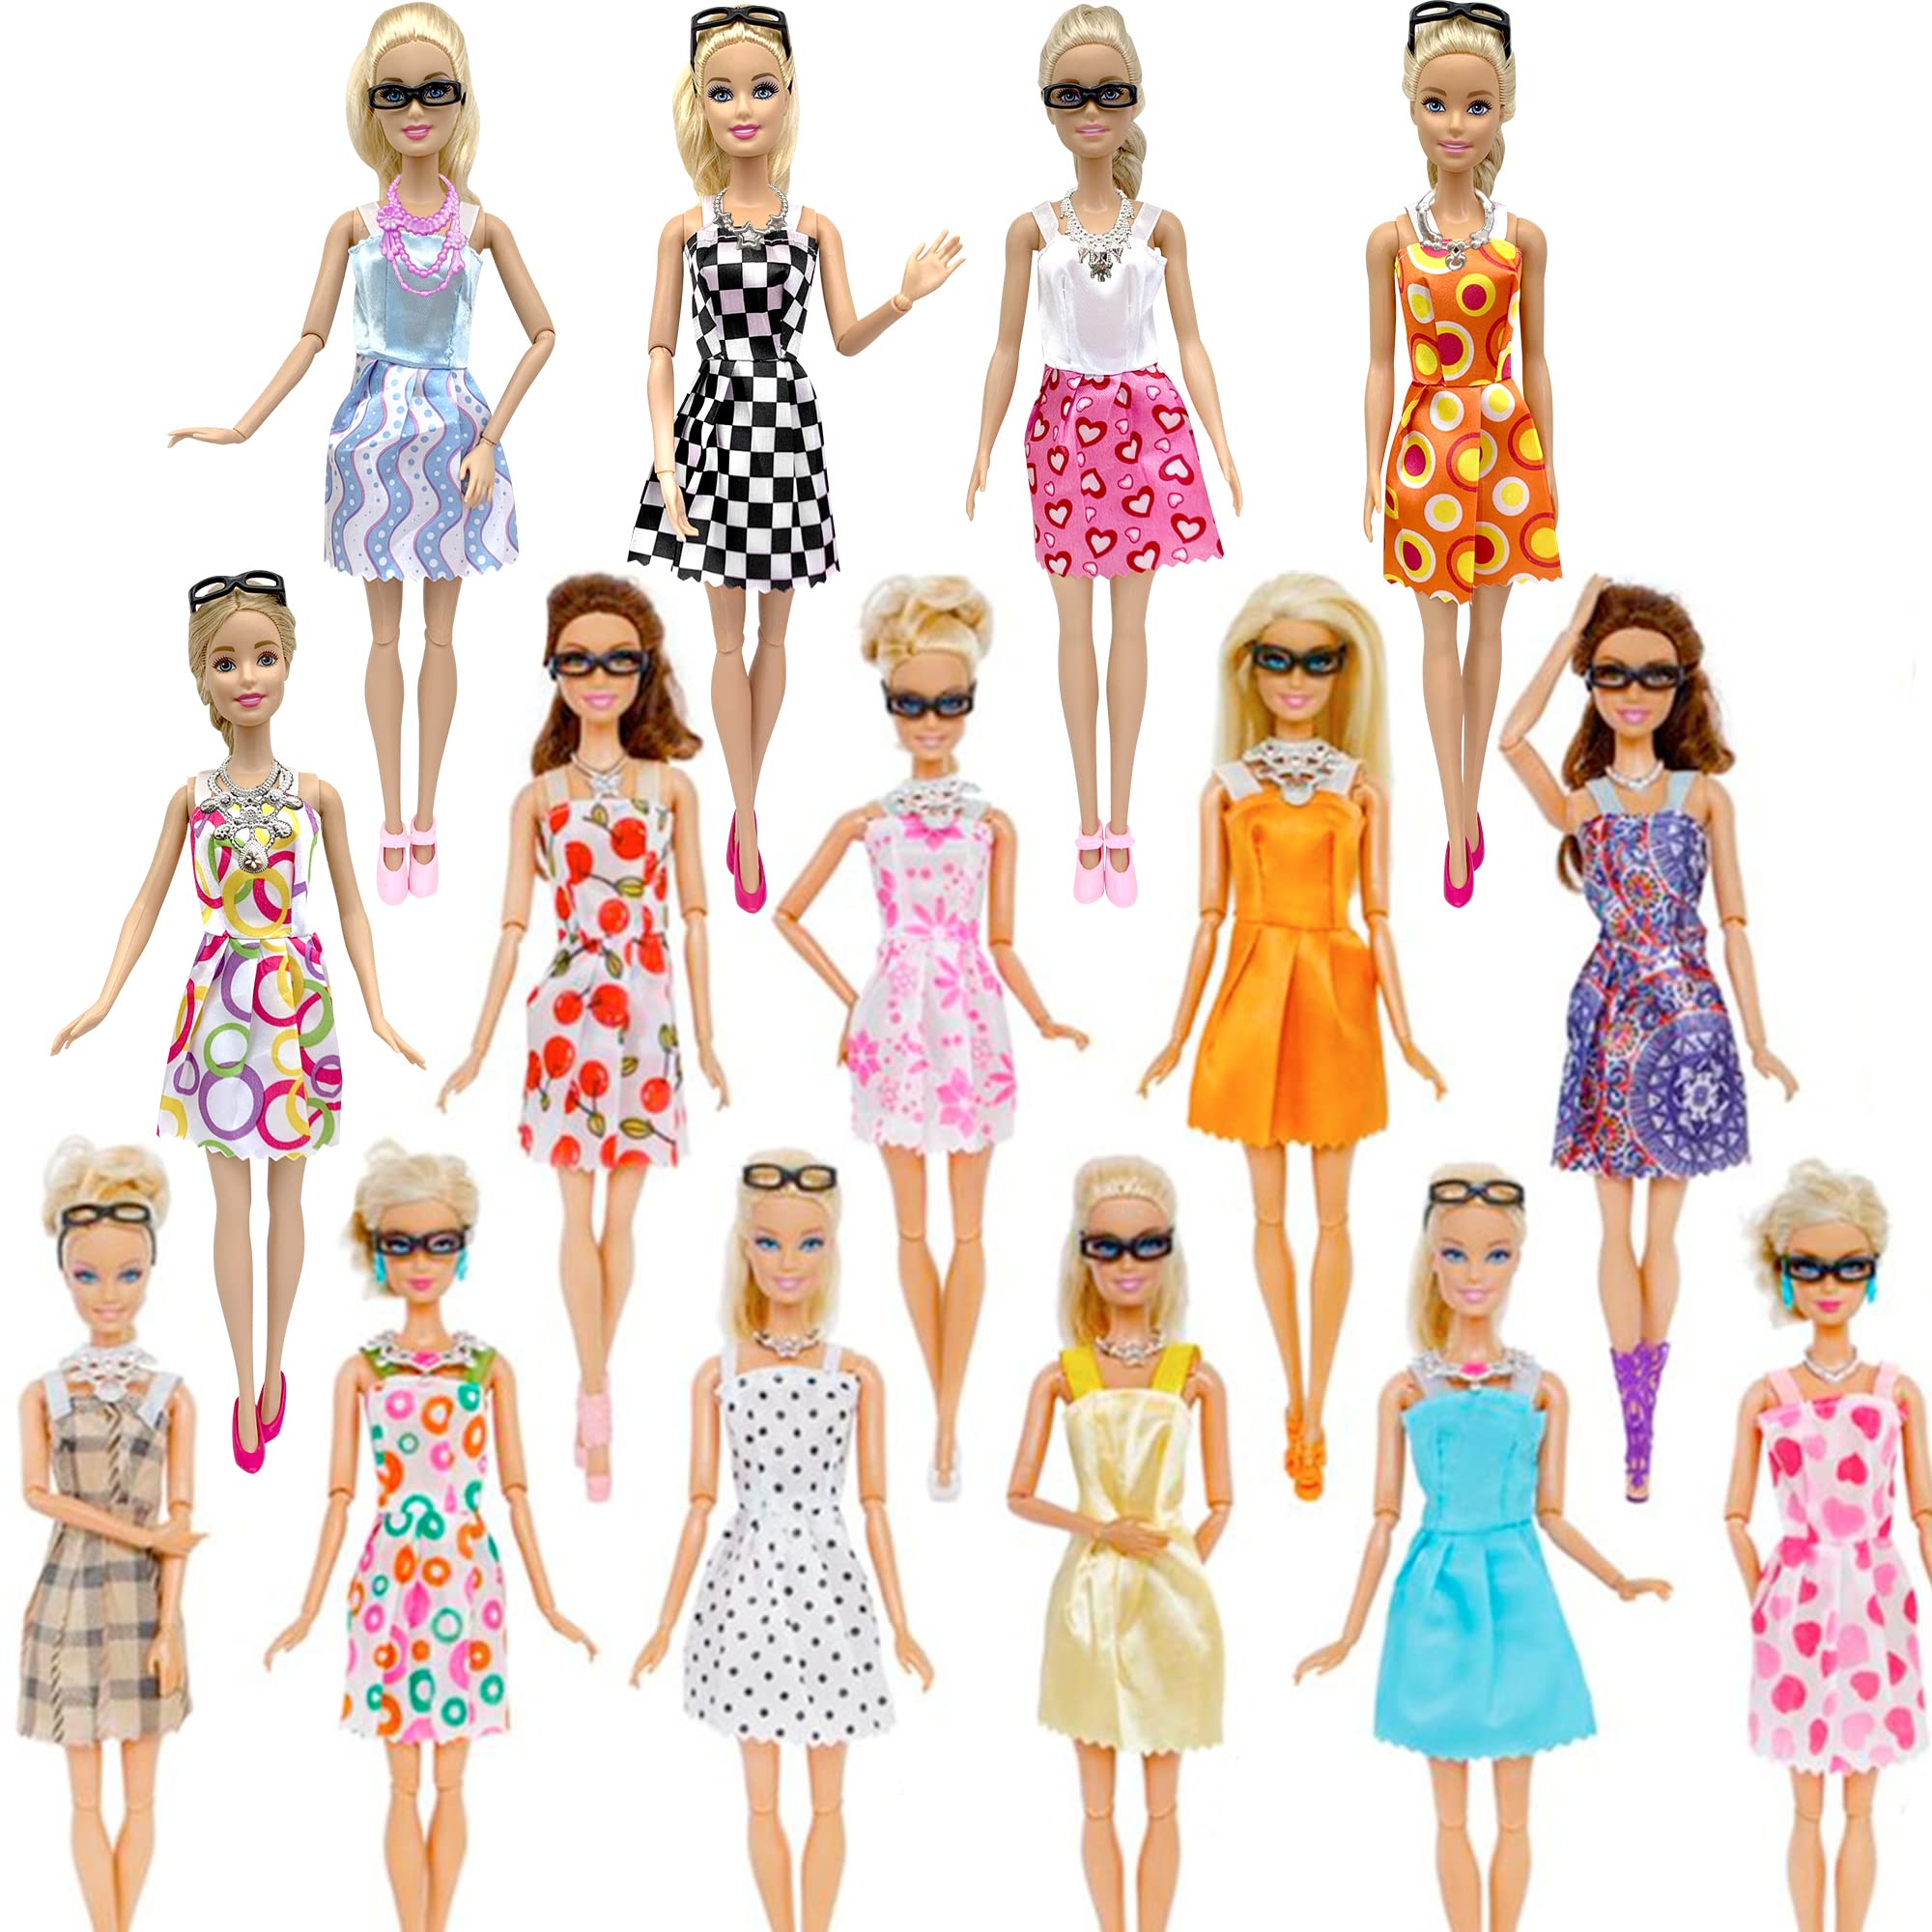 32 PCS Doll Clothes and Accessories, 10x Mix Party Dresses, 4X Glasses, 6X Necklaces, 2X Magic Wands, 10x Shoes for 11.5 inch Doll, Gifts for Girls